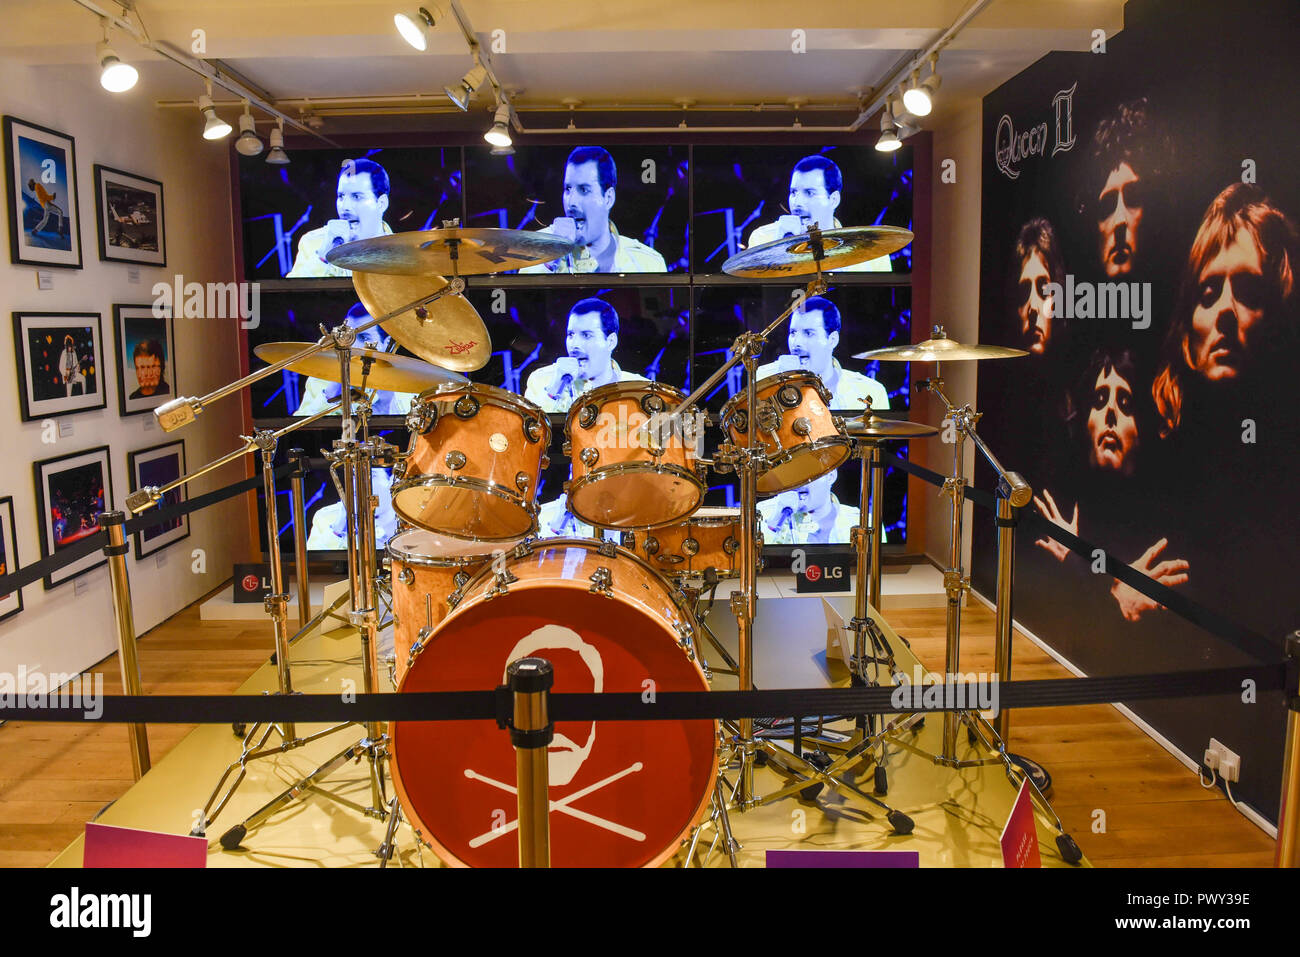 London, UK. 18 October 2018. Roger Taylor's drum kit on display at the  Queen pop-up shop which has opened in Carnaby Street. Coinciding with the  release next week of the movie "Bohemian